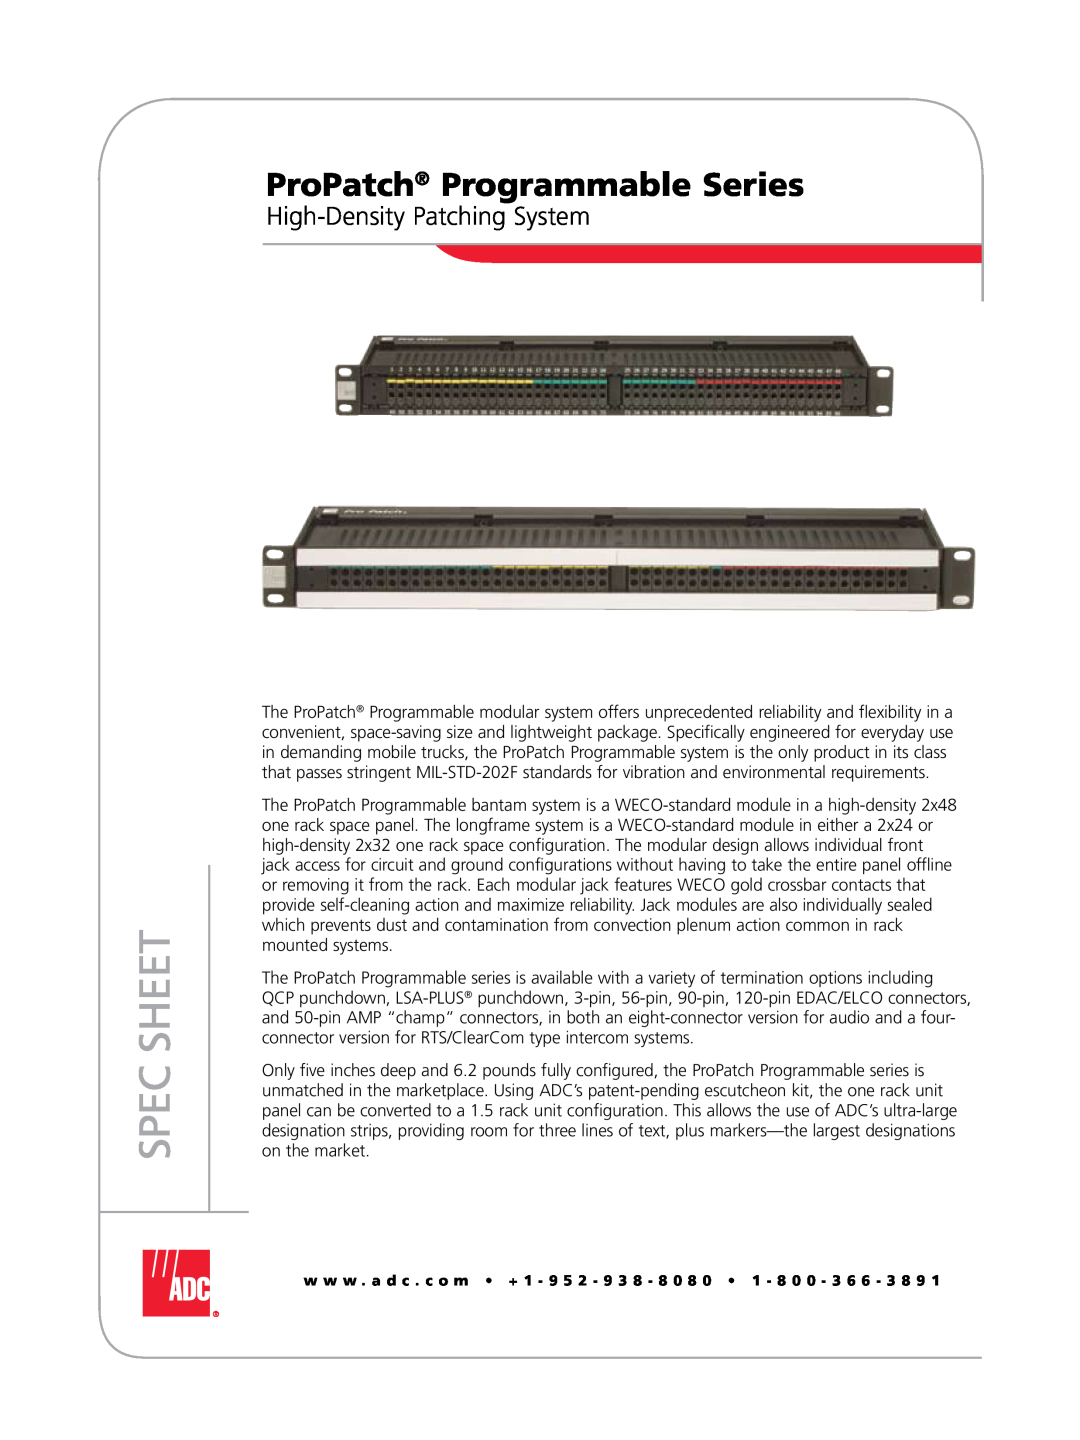 ADC manual ProPatch Programmable Series, High-Density Patching System, Spec Sheet 